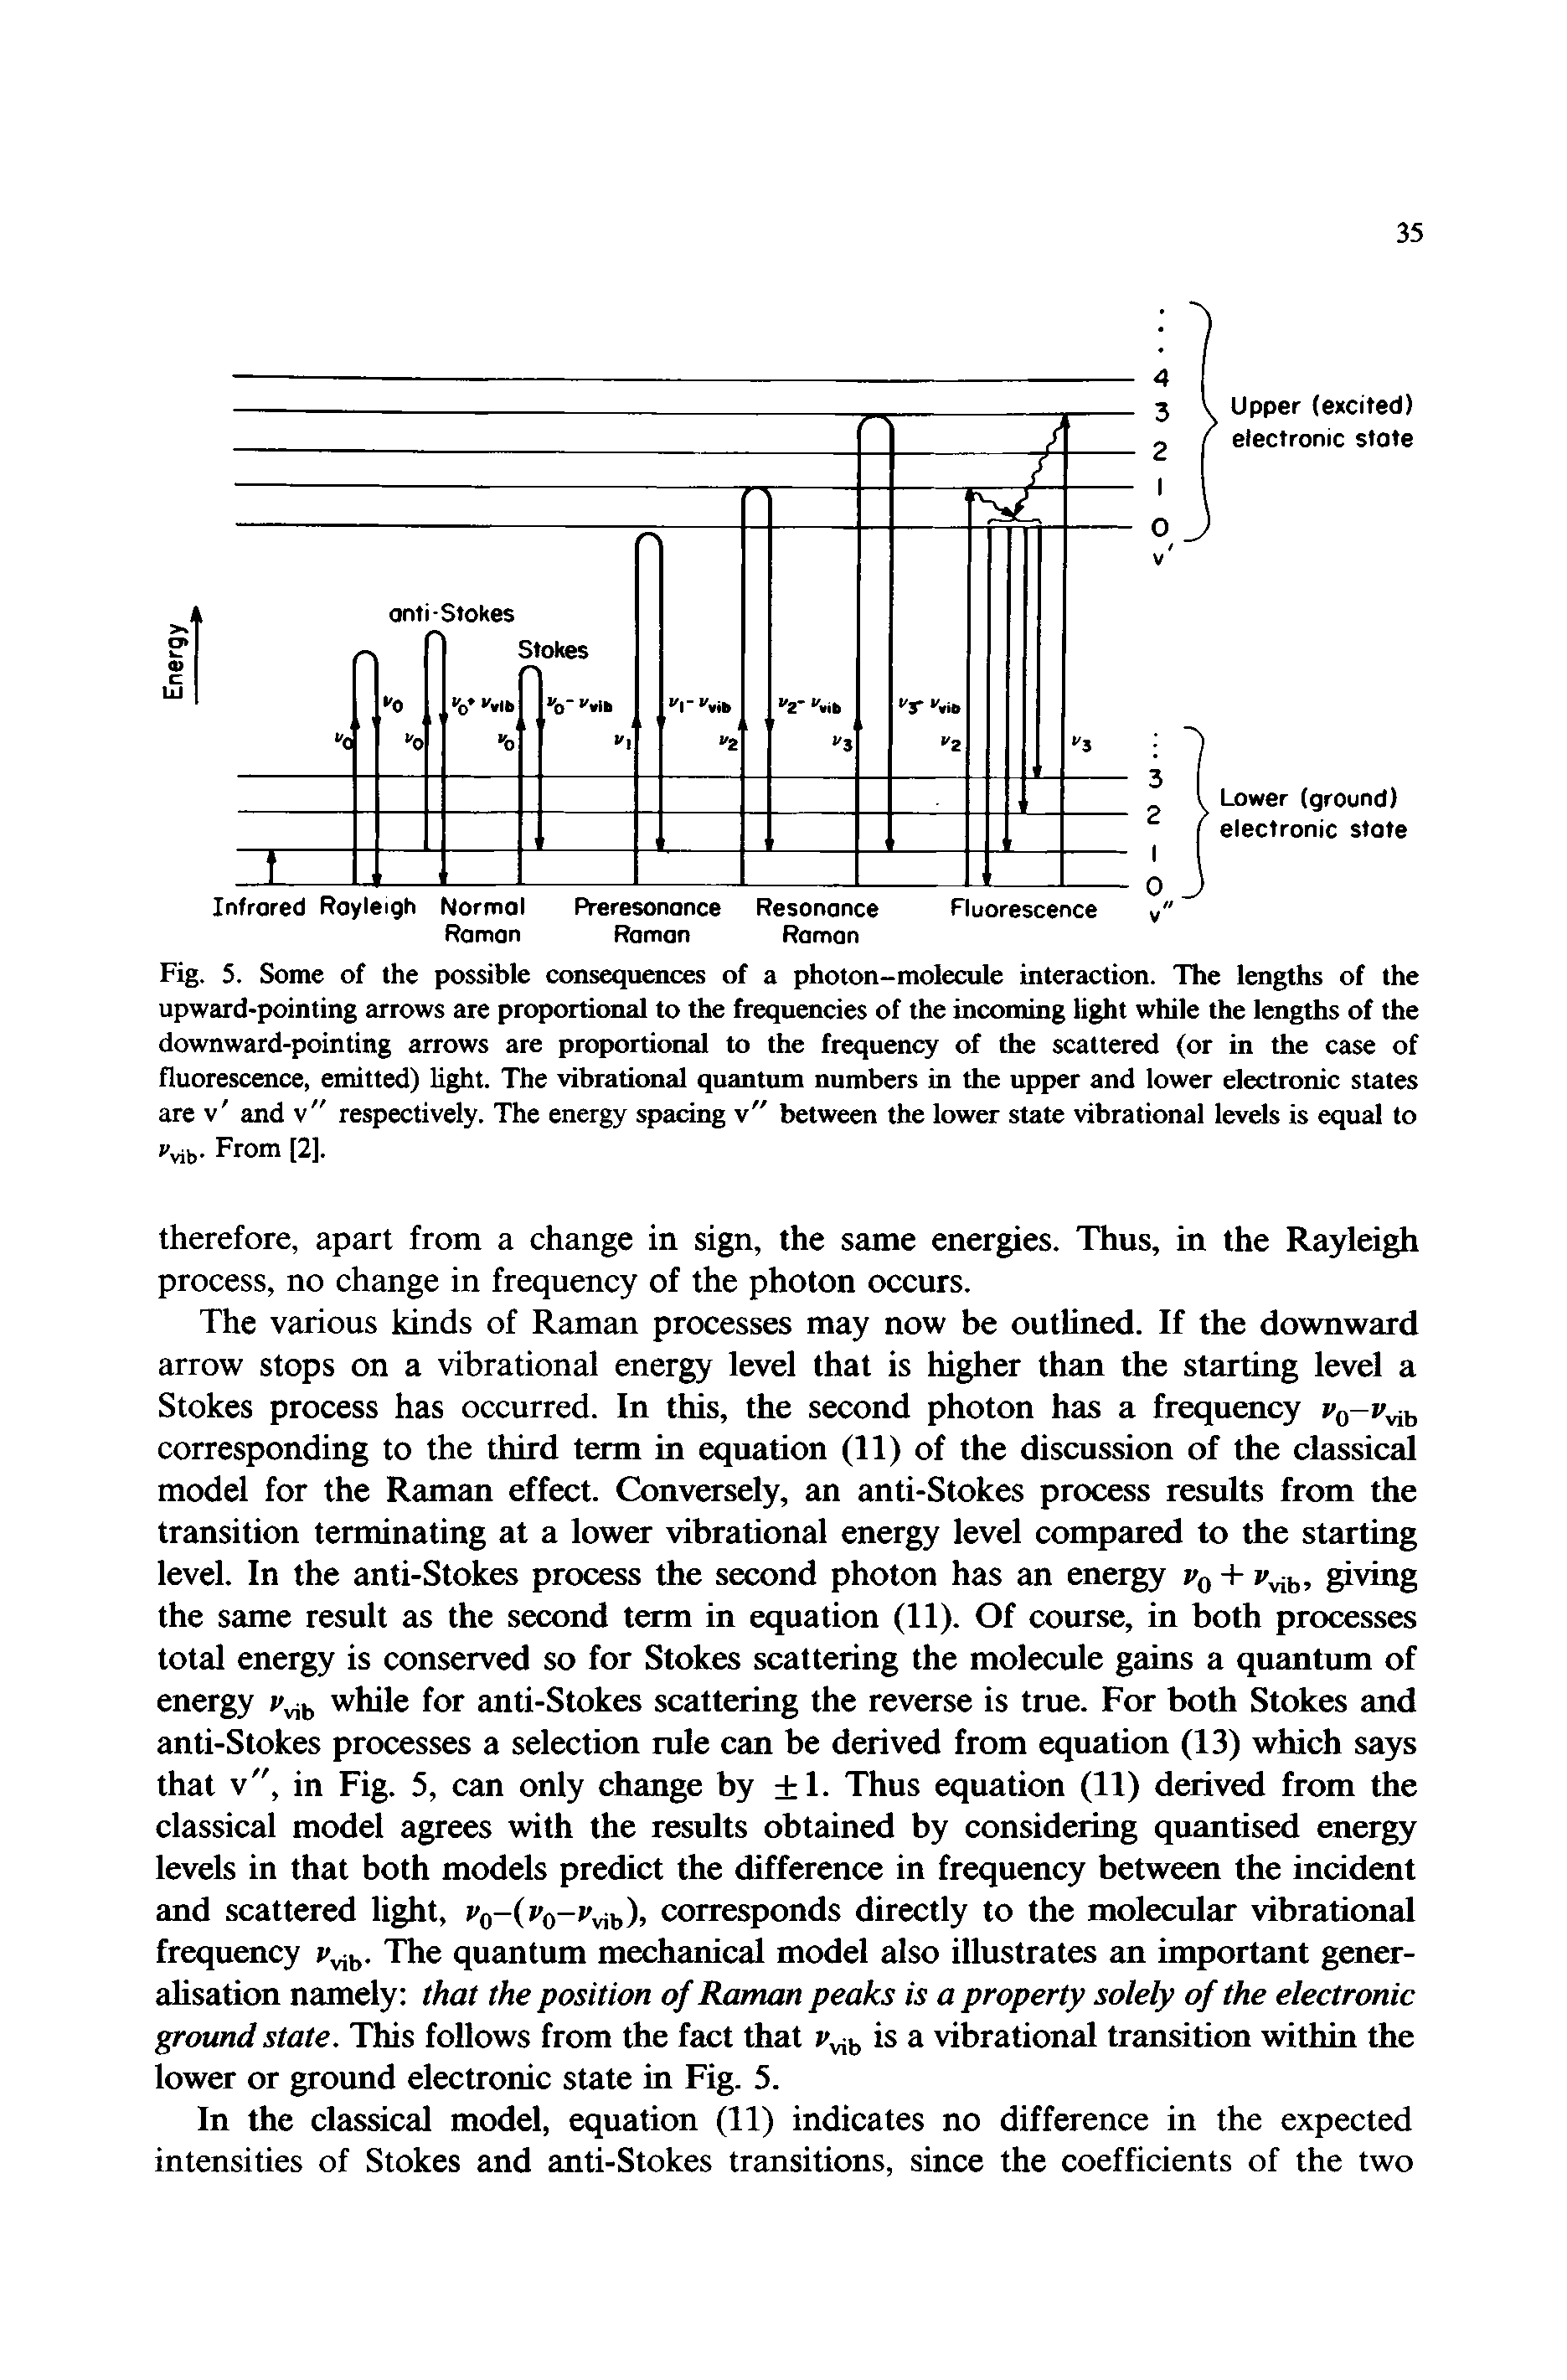 Fig. 5. Some of the possible consequences of a photon-molecule interaction. The lengths of the upward-pointing arrows are proportional to the frequencies of the incoming light while the lengths of the downward-pointing arrows are proportional to the frequency of the scattered (or in the case of fluorescence, emitted) light. The vibrational quantum numbers in the upper and lower electronic states are v and v" respectively. The energy spacing v" between the lower state vibrational levels is equal to From [2].